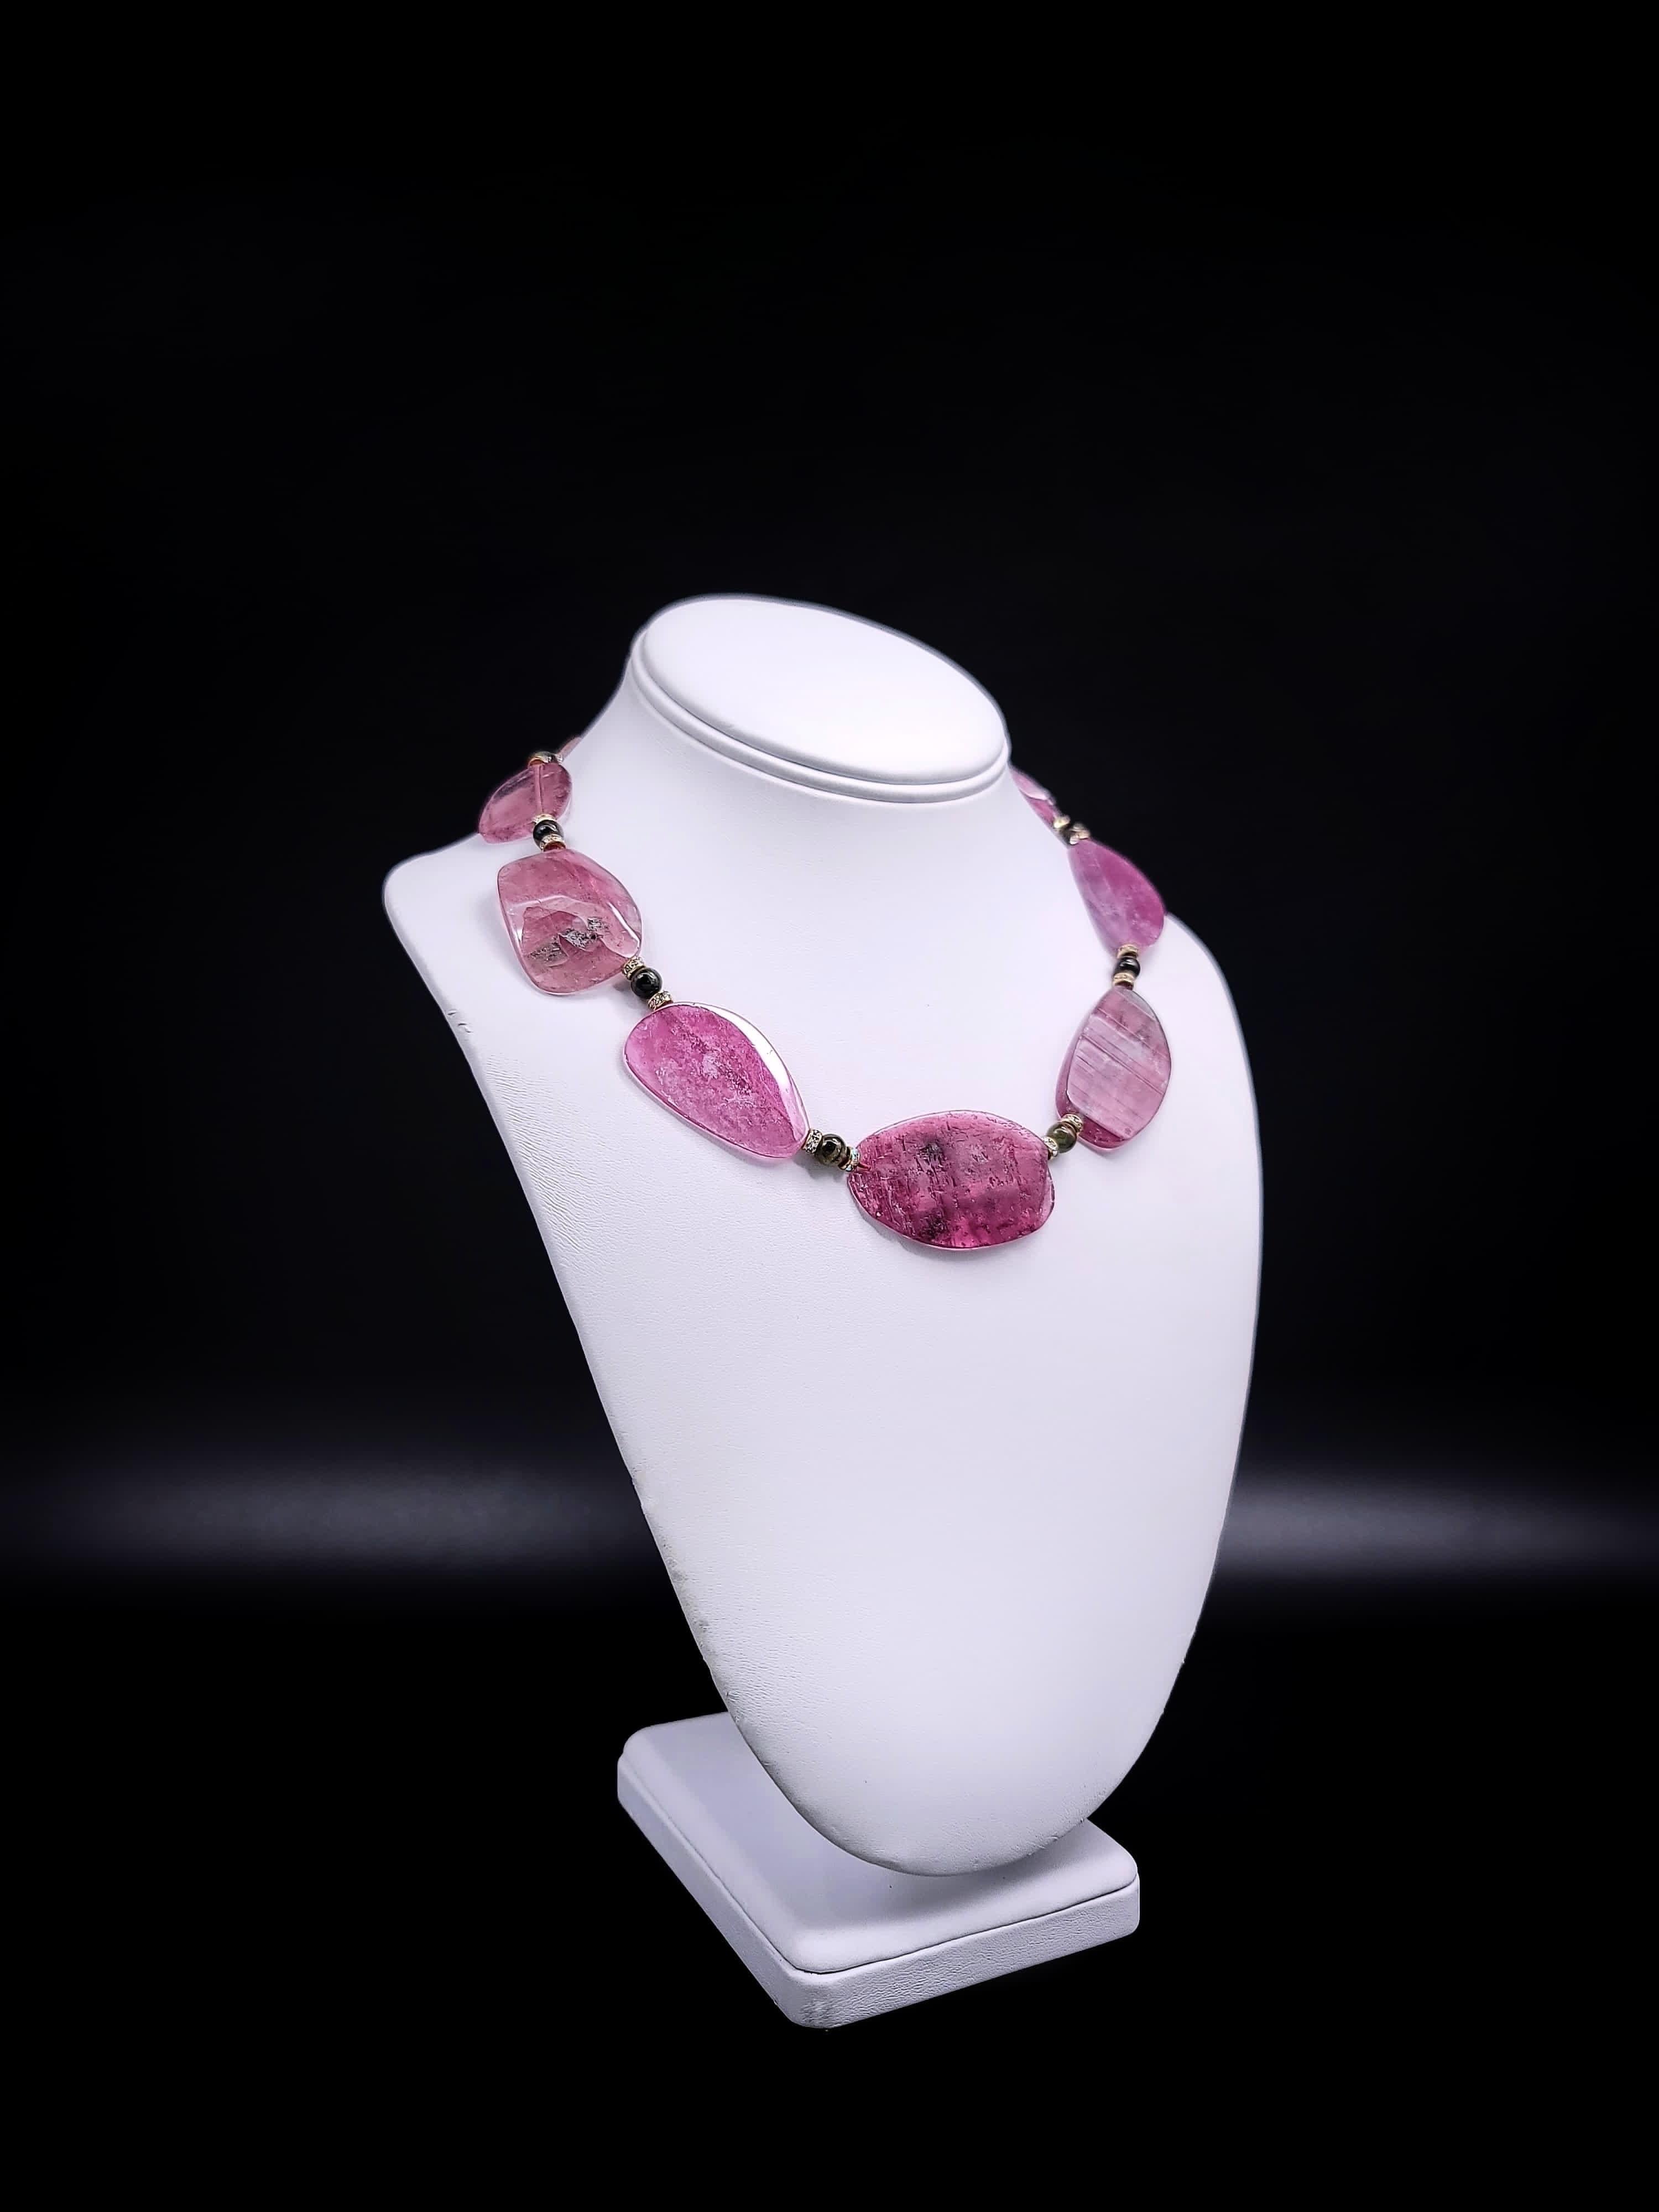 One-of-a-Kind

Elevate your jewelry collection with this extraordinary Tourmaline Necklace, featuring an unusual cut that showcases the stone's unique translucency and depth of color. Unlike the more common faceted or polished tourmalines, these